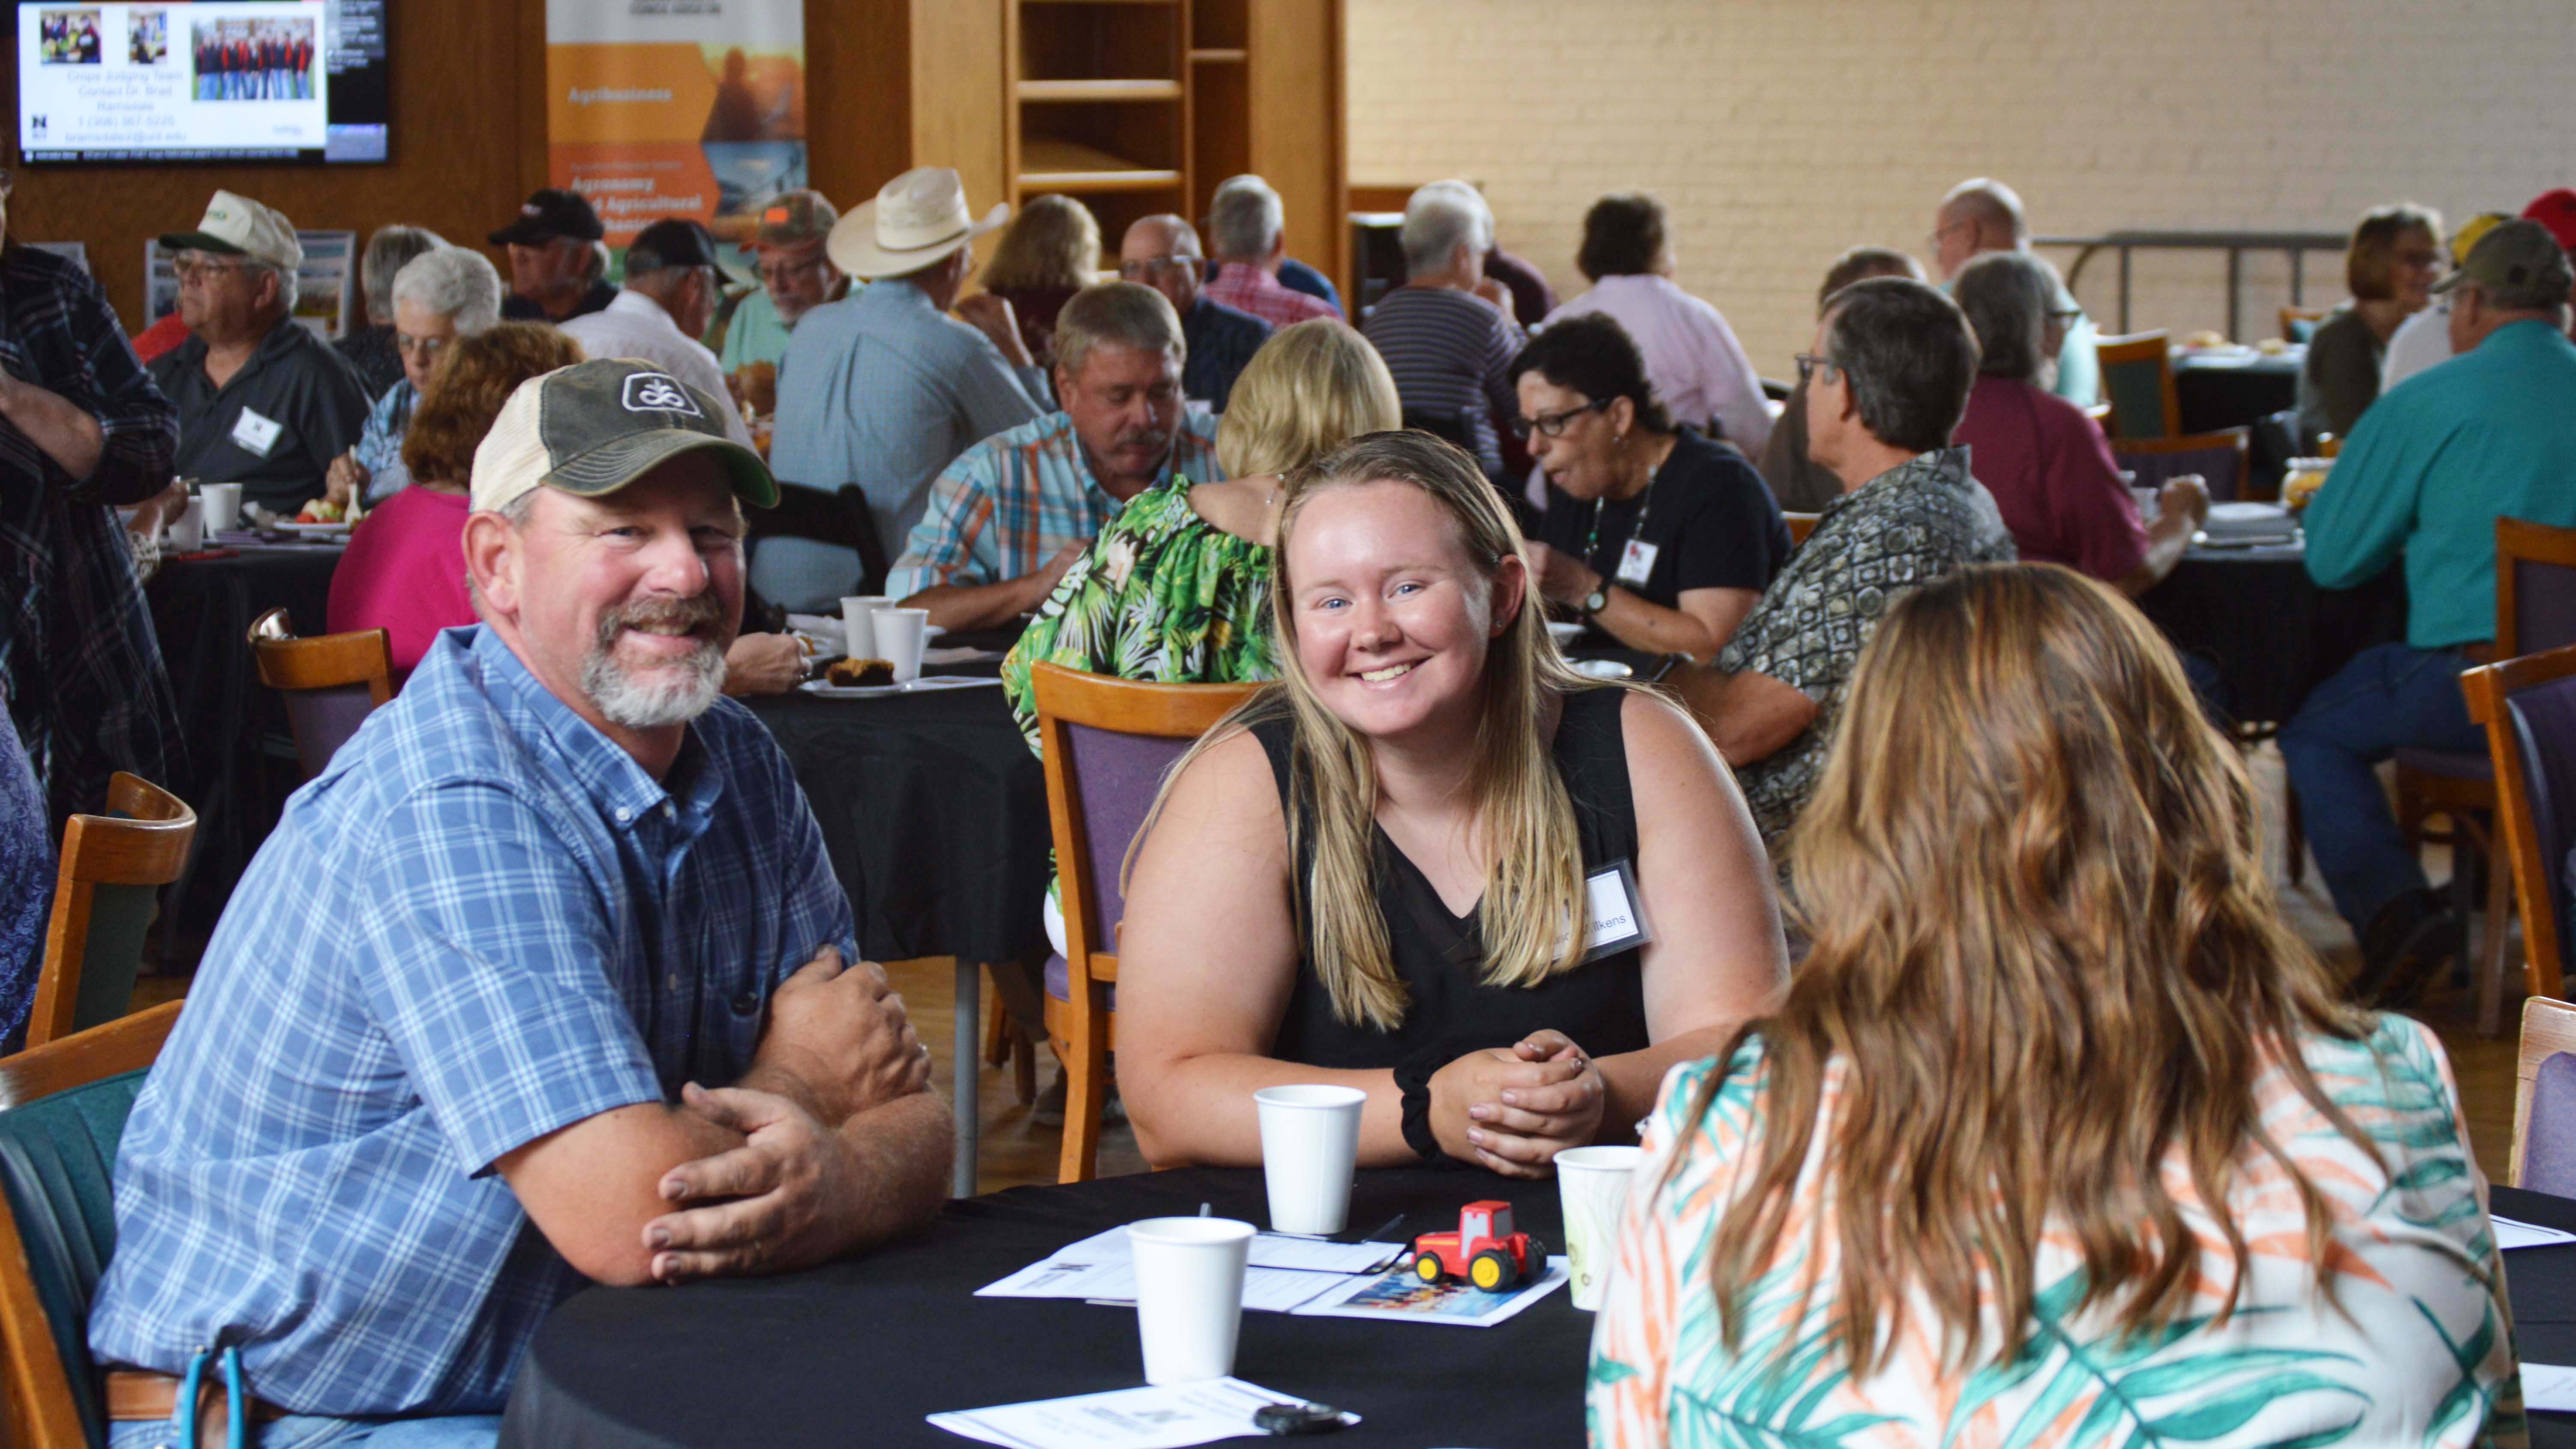 Mike and Allison Wilkens of Gibbon were among 102 attendees at the 2021 Aggie Alumni Day. Mike is an agribusiness grad from 1995, and Allison will graduate in 2022. (M. Crawford / NCTA News photo)